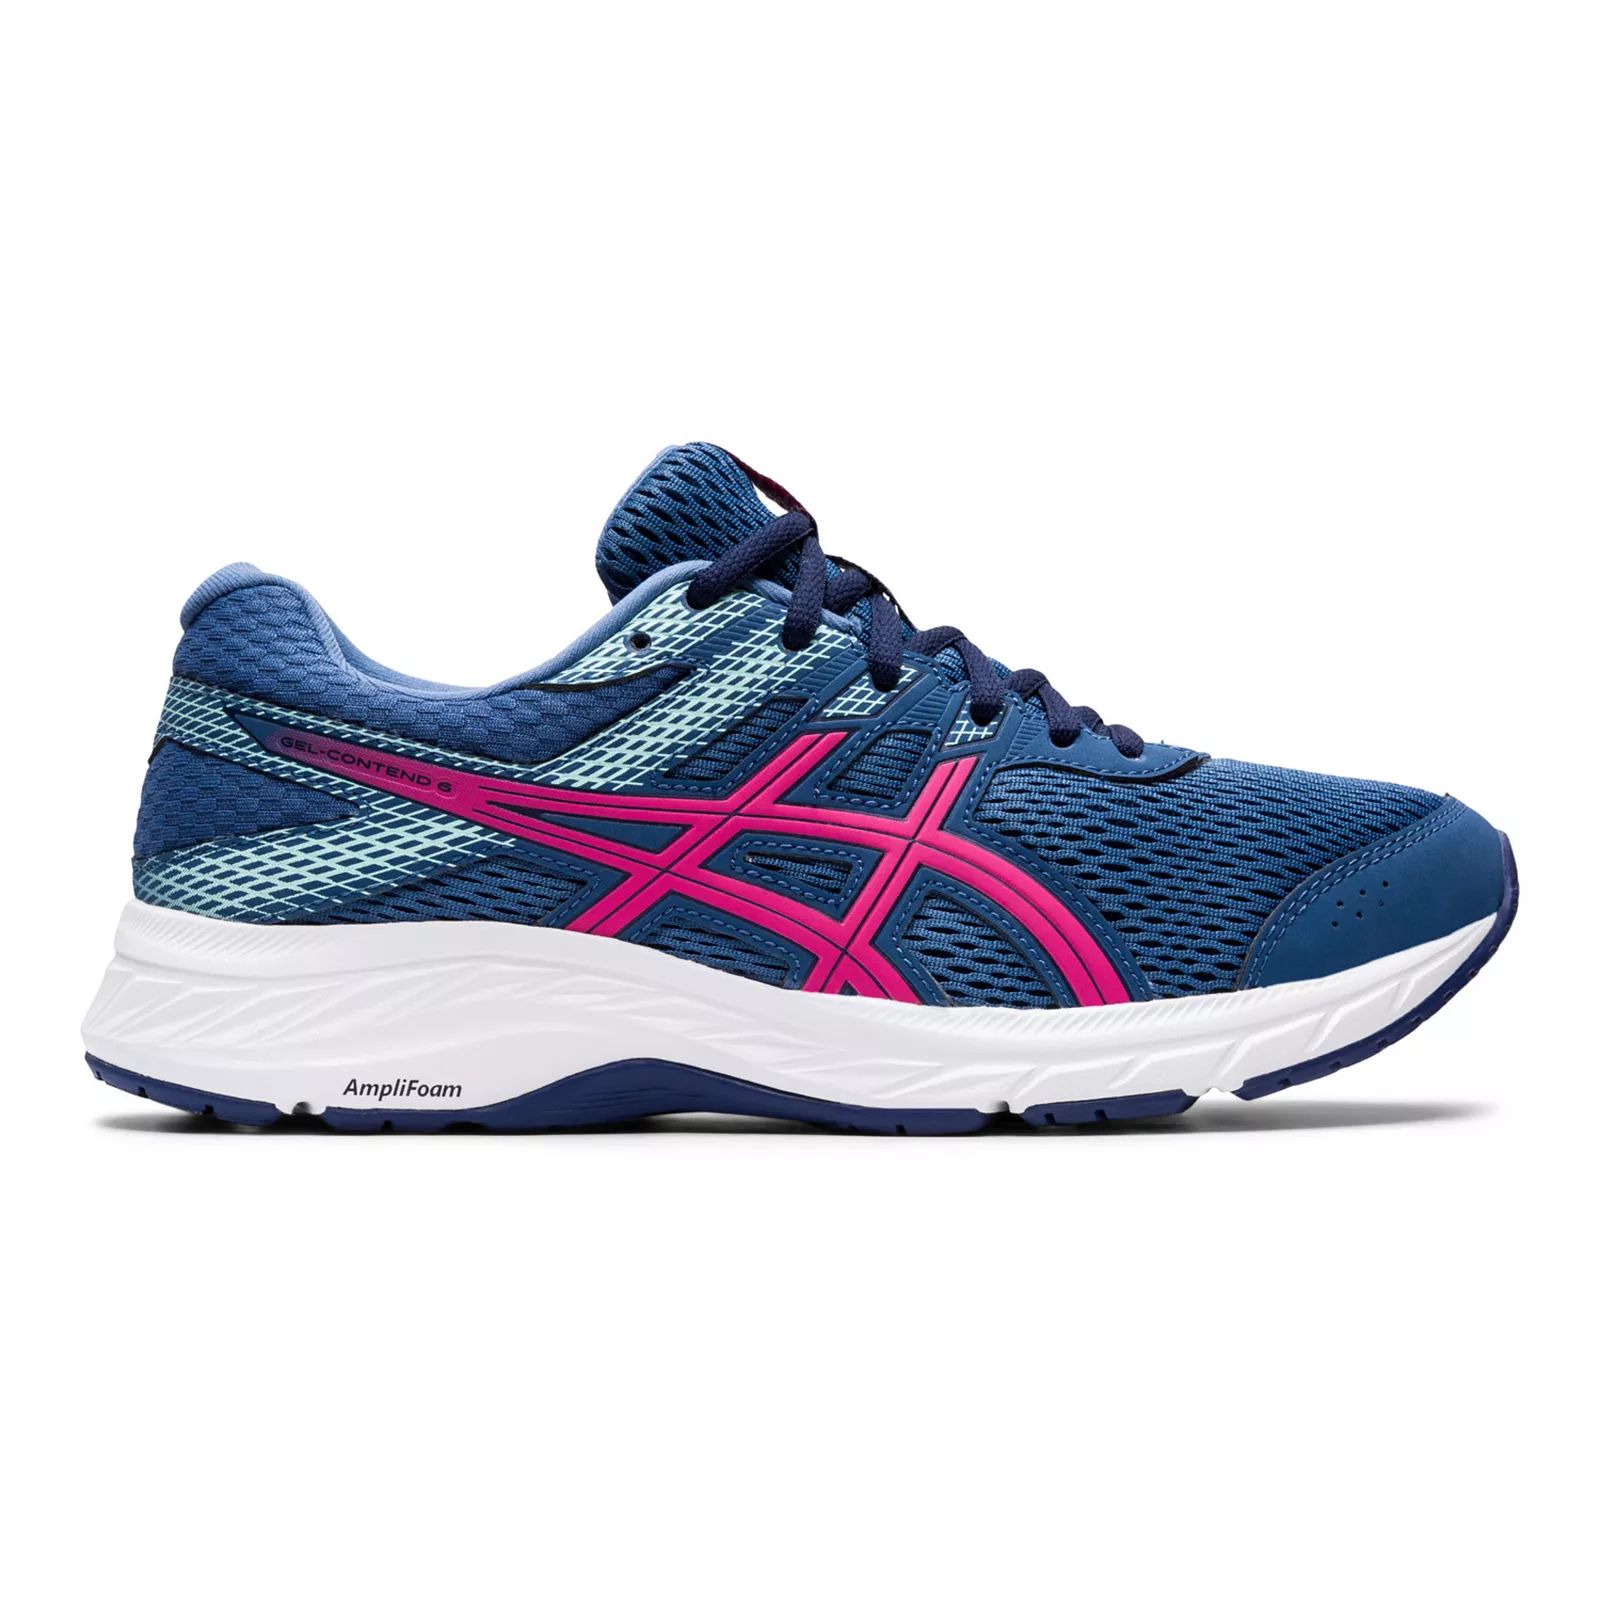 ASICS GEL-Contend 6 Women's Running Shoes, Size: 12 Wide, Blue | Kohl's